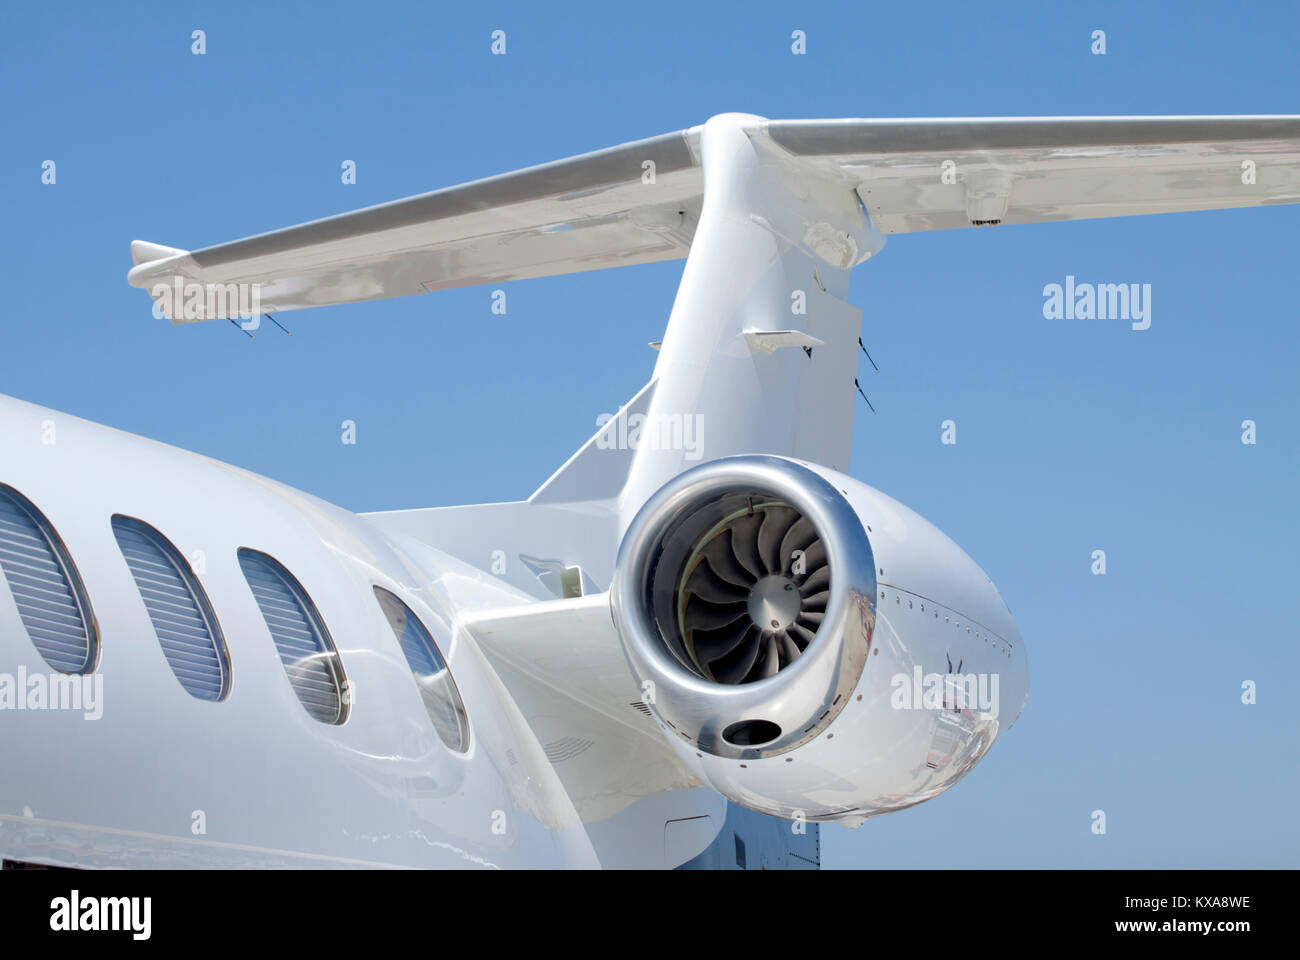 Corporate jet engine and tail section Stock Photo